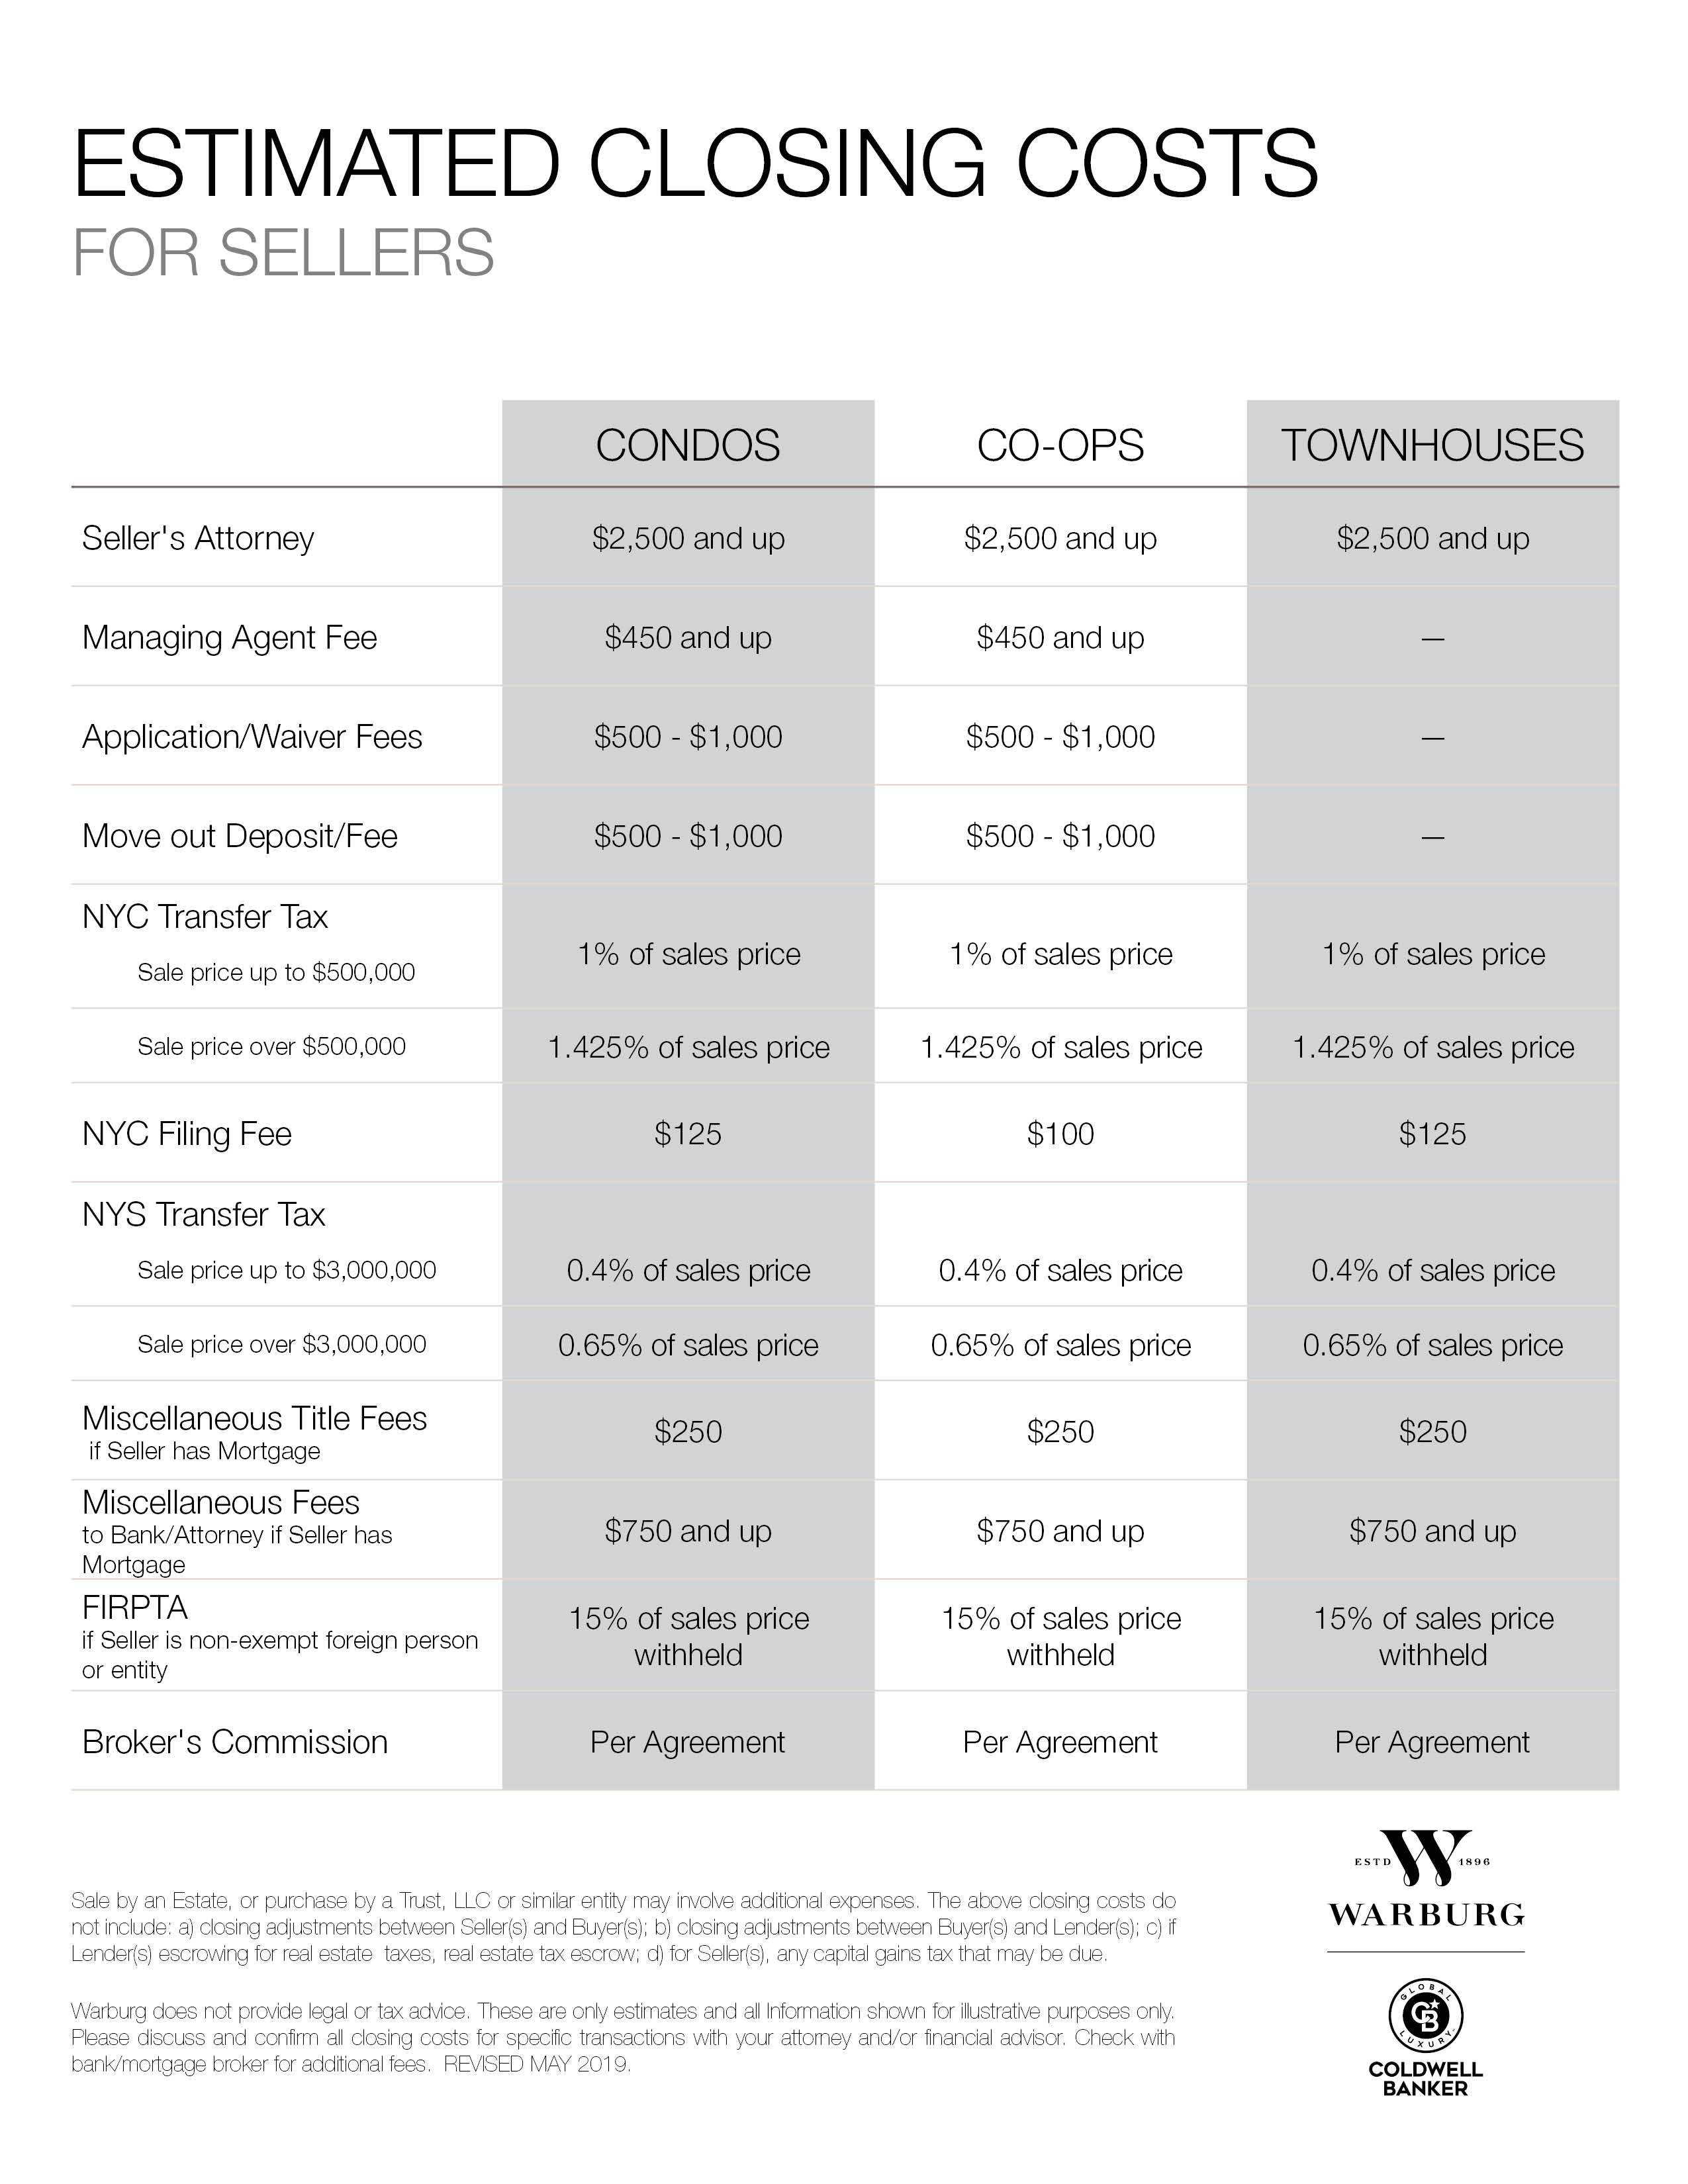 CBW-New Closing Costs - for Sellers